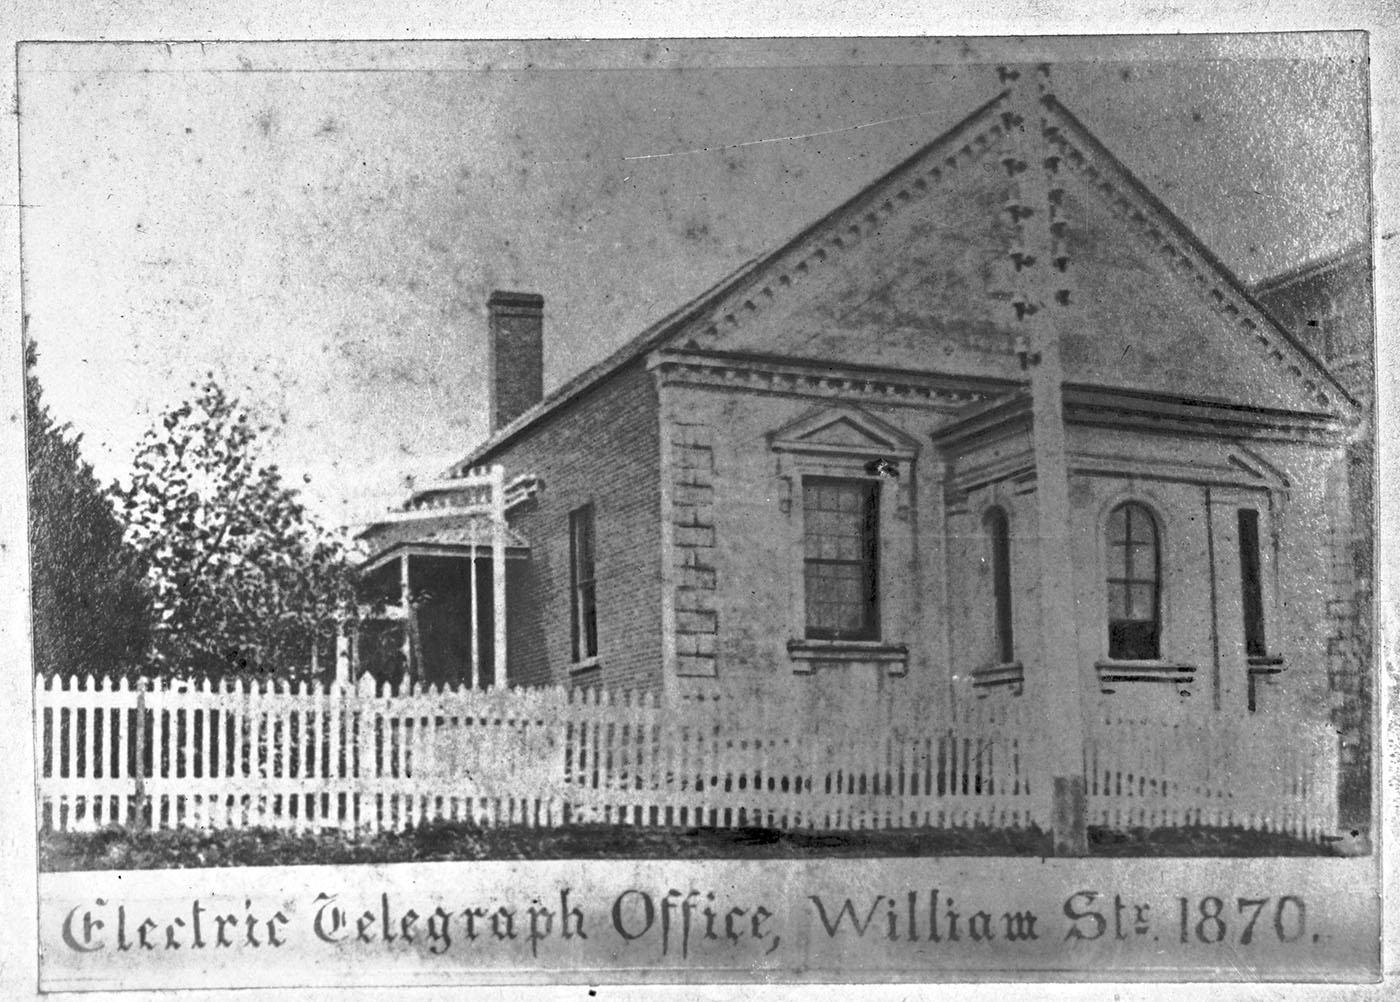 The Electric Telegraph Office brick building with white picket fence in front.